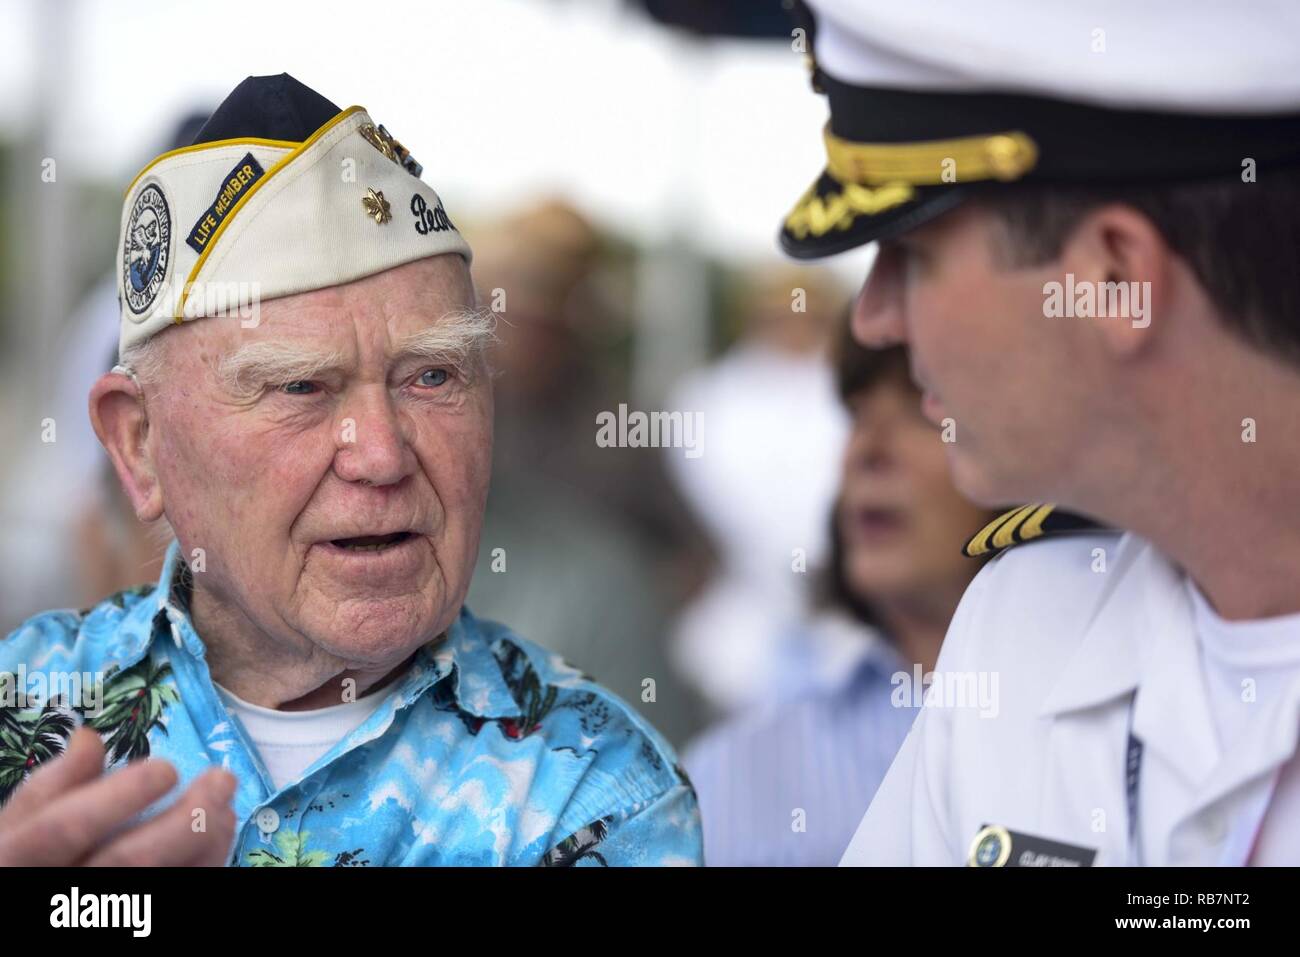 PEARL HARBOR (Dec. 7, 2016) USS Oklahoma survivor Roy Carter and Cmdr. Clayton Doss, assigned to U.S. Pacific Fleet, converse before the USS Oklahoma Memorial Service on the 75th anniversary of the attacks on Pearl Harbor and Oahu. The U.S. military and the State of Hawaii are hosting a series of remembrance events throughout the week to honor the courage and sacrifices of those who served during Dec. 7, 1941, and throughout the Pacific theater. As a Pacific nation, the U.S. is committed to continue its responsibility of protecting the Pacific sea-lanes, advancing international ideals and rela Stock Photo